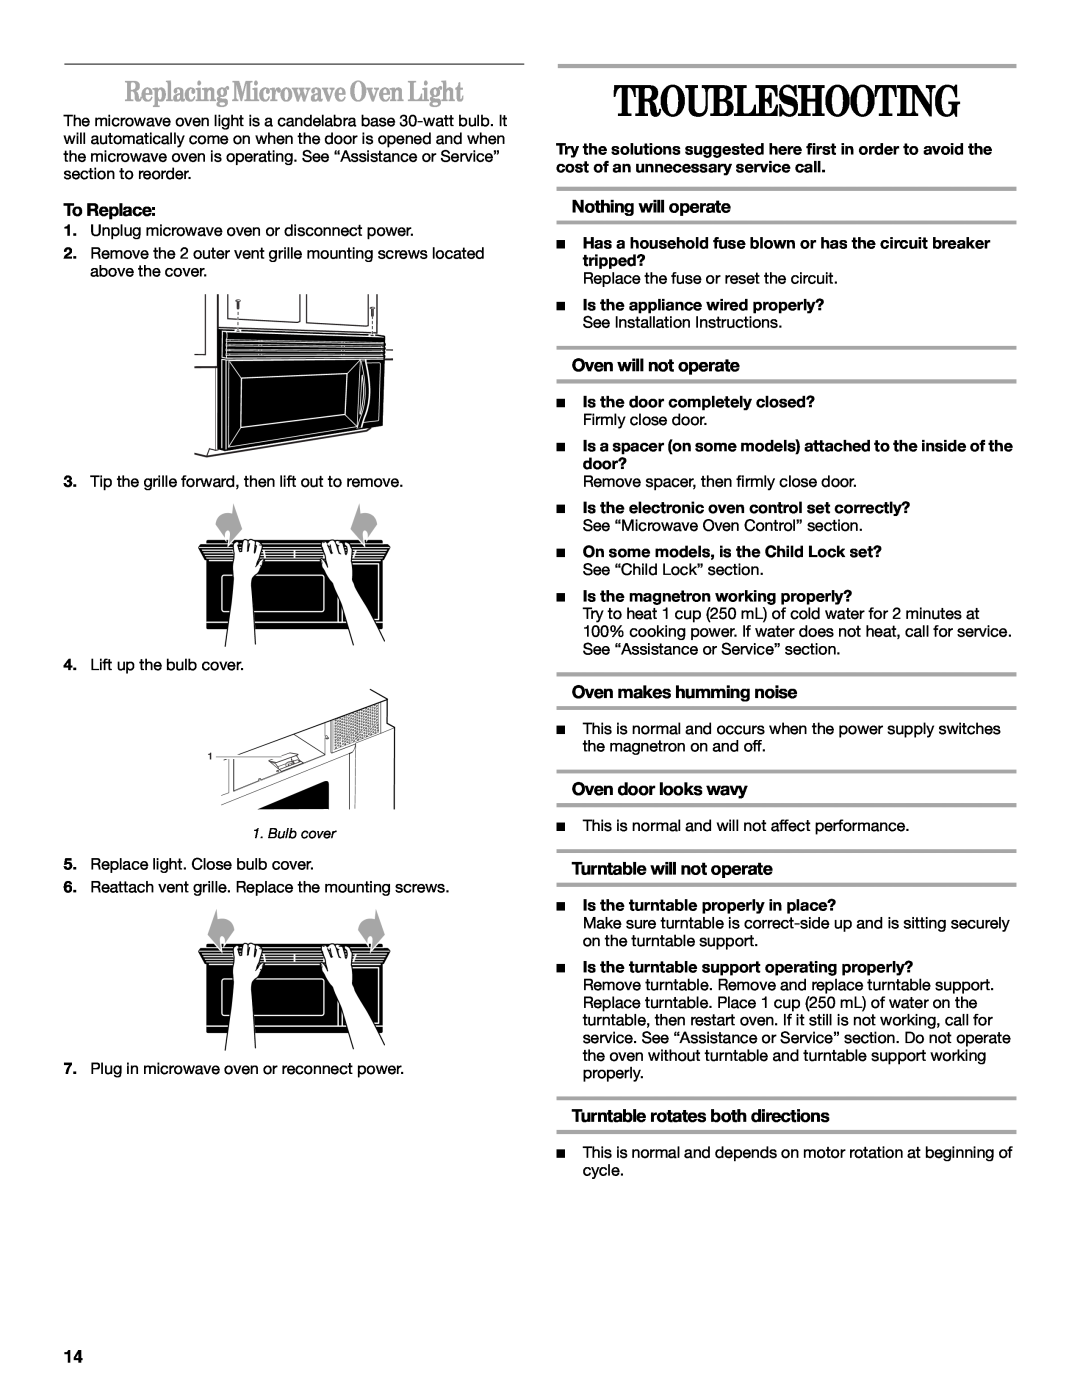 Whirlpool MH1141XM manual Troubleshooting, Replacing Microwave Oven Light, Nothing will operate, Oven will not operate 